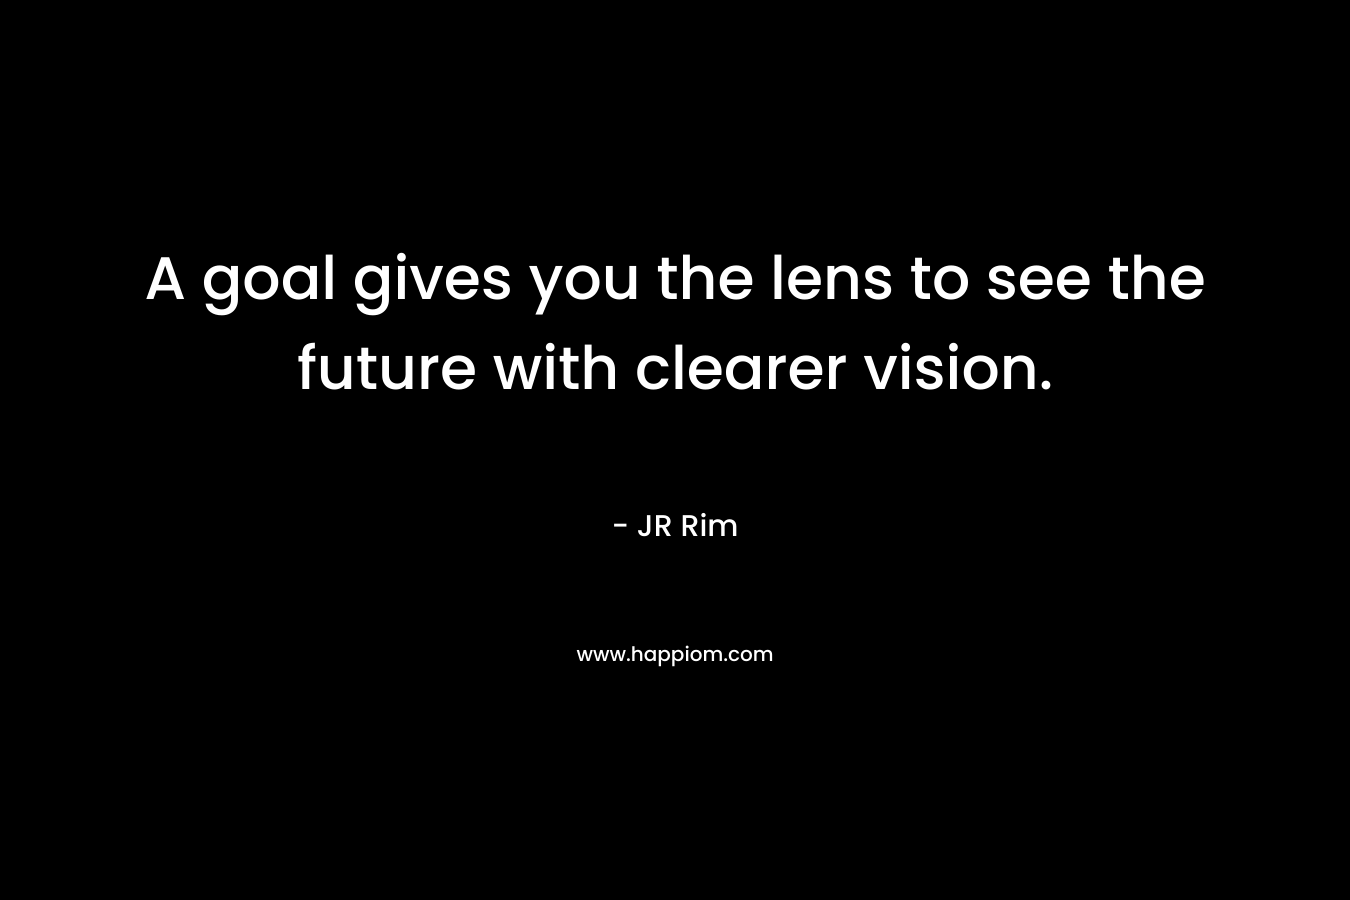 A goal gives you the lens to see the future with clearer vision.